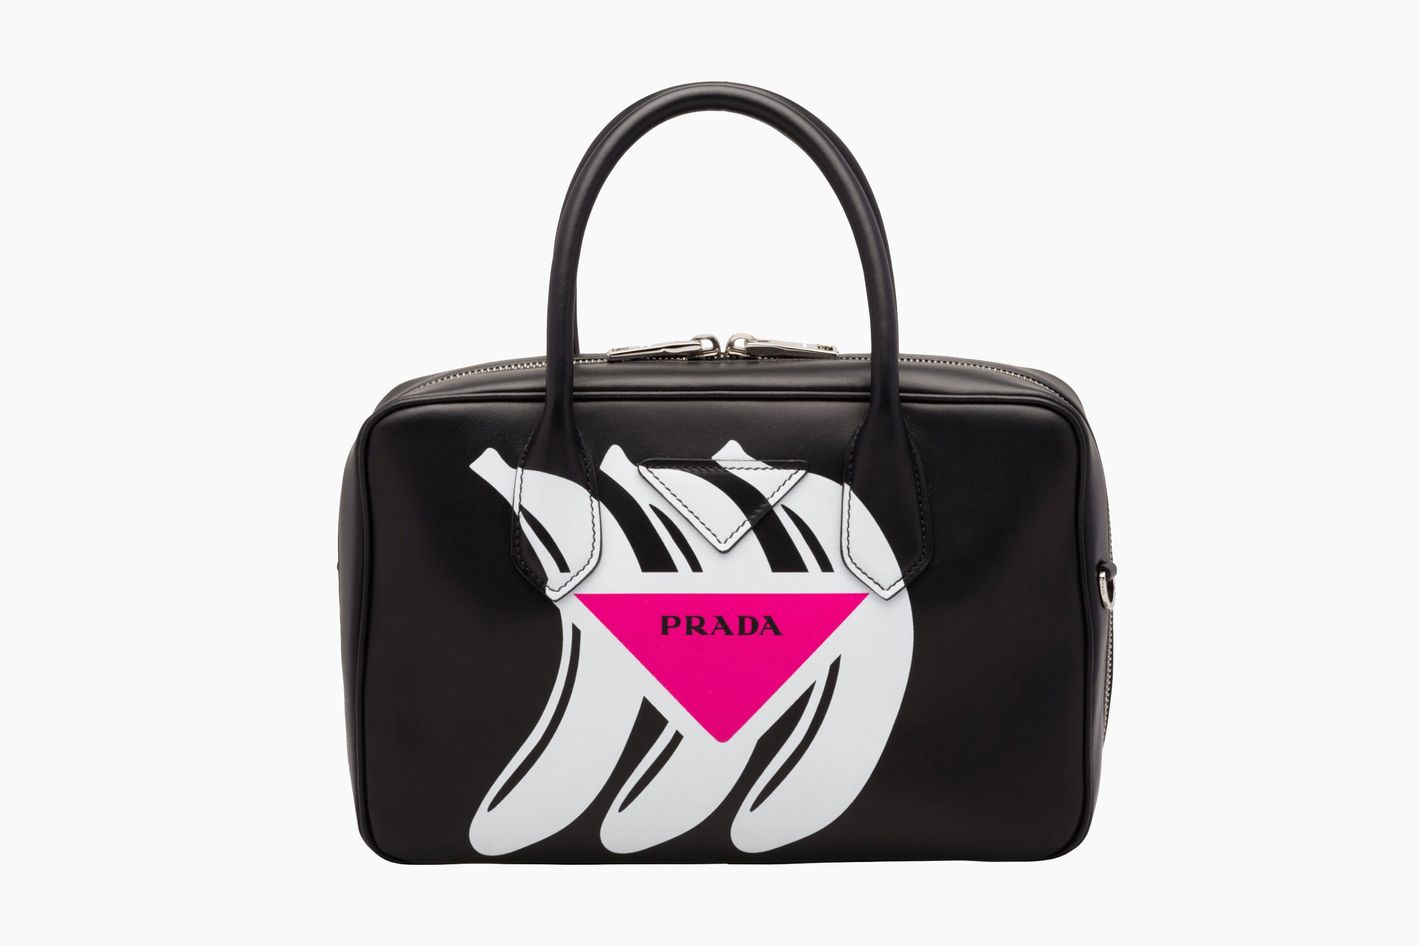 4 Prada Bags That Are Worth the Investment - luxfy